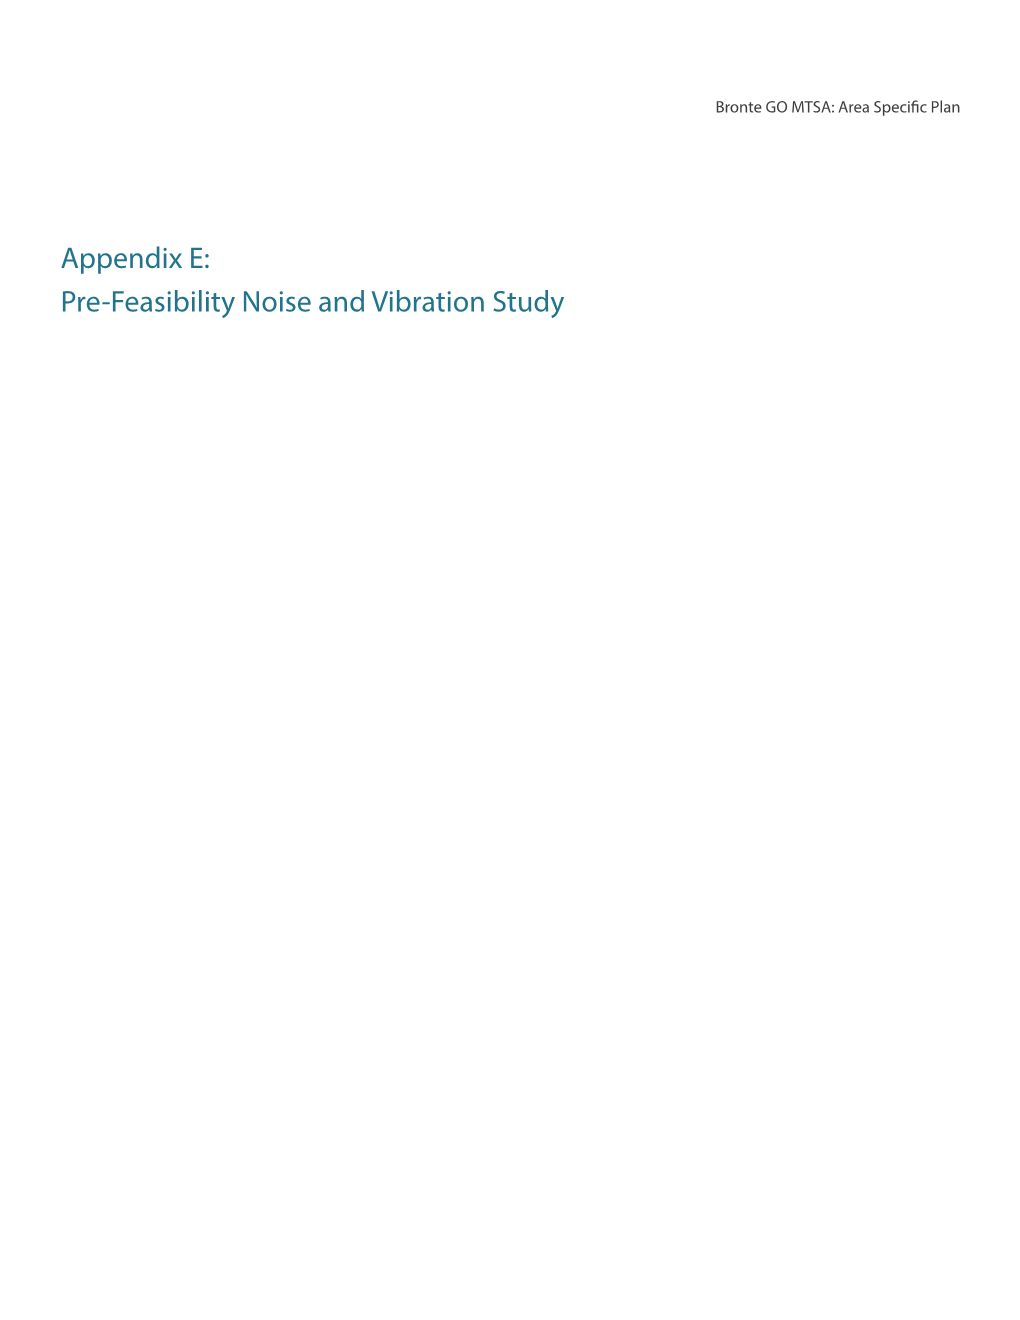 Pre-Feasibility Noise and Vibration Study